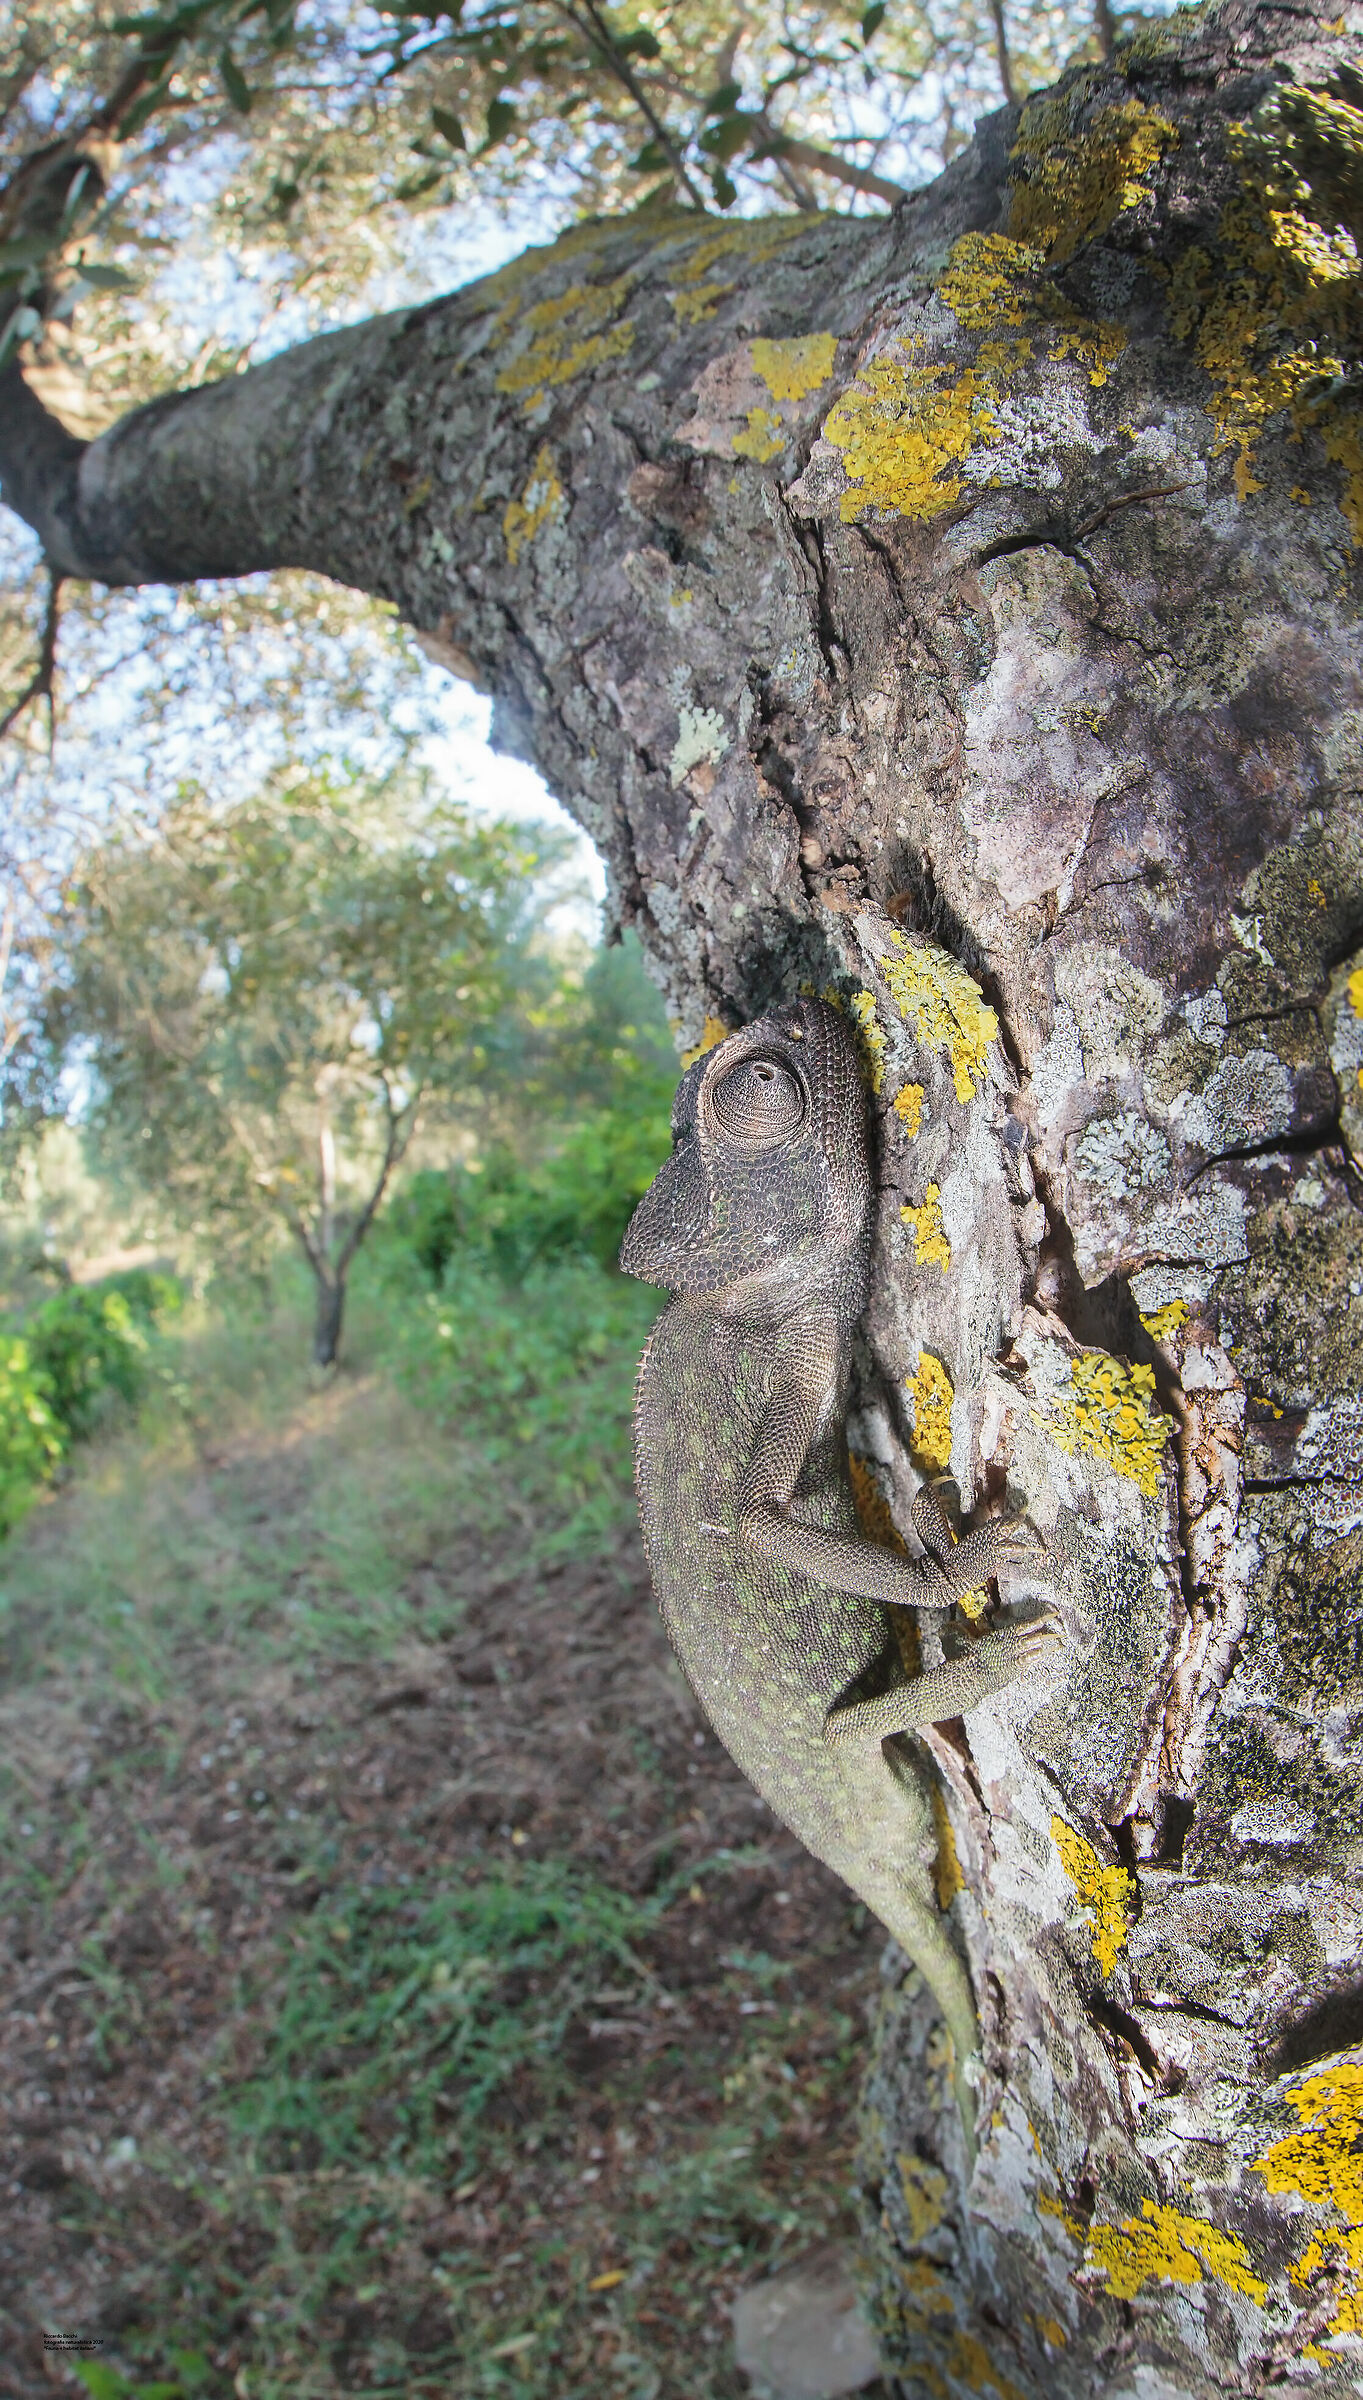 Mediterranean chameleon and Olive Grove, Italy 2019...